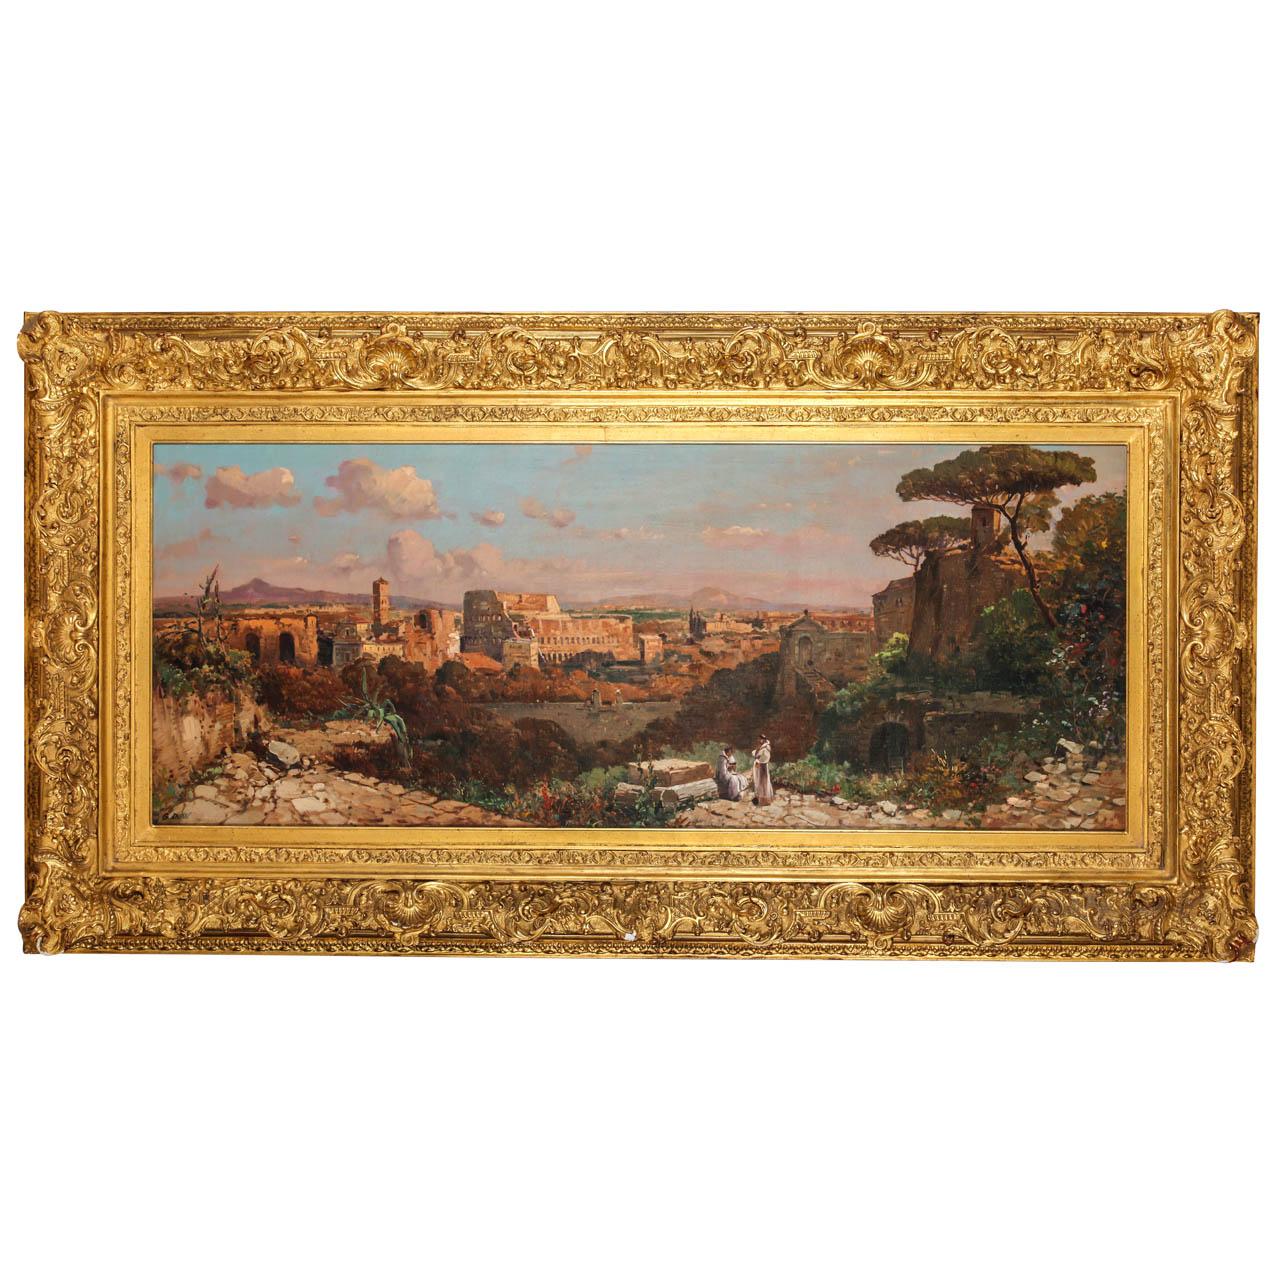 A fine Roman landscape oil on canvas depicting the Colosseum and the Via Sacra.  The scene is full of characters and architectural elements and captures the magic light of Rome. signed 